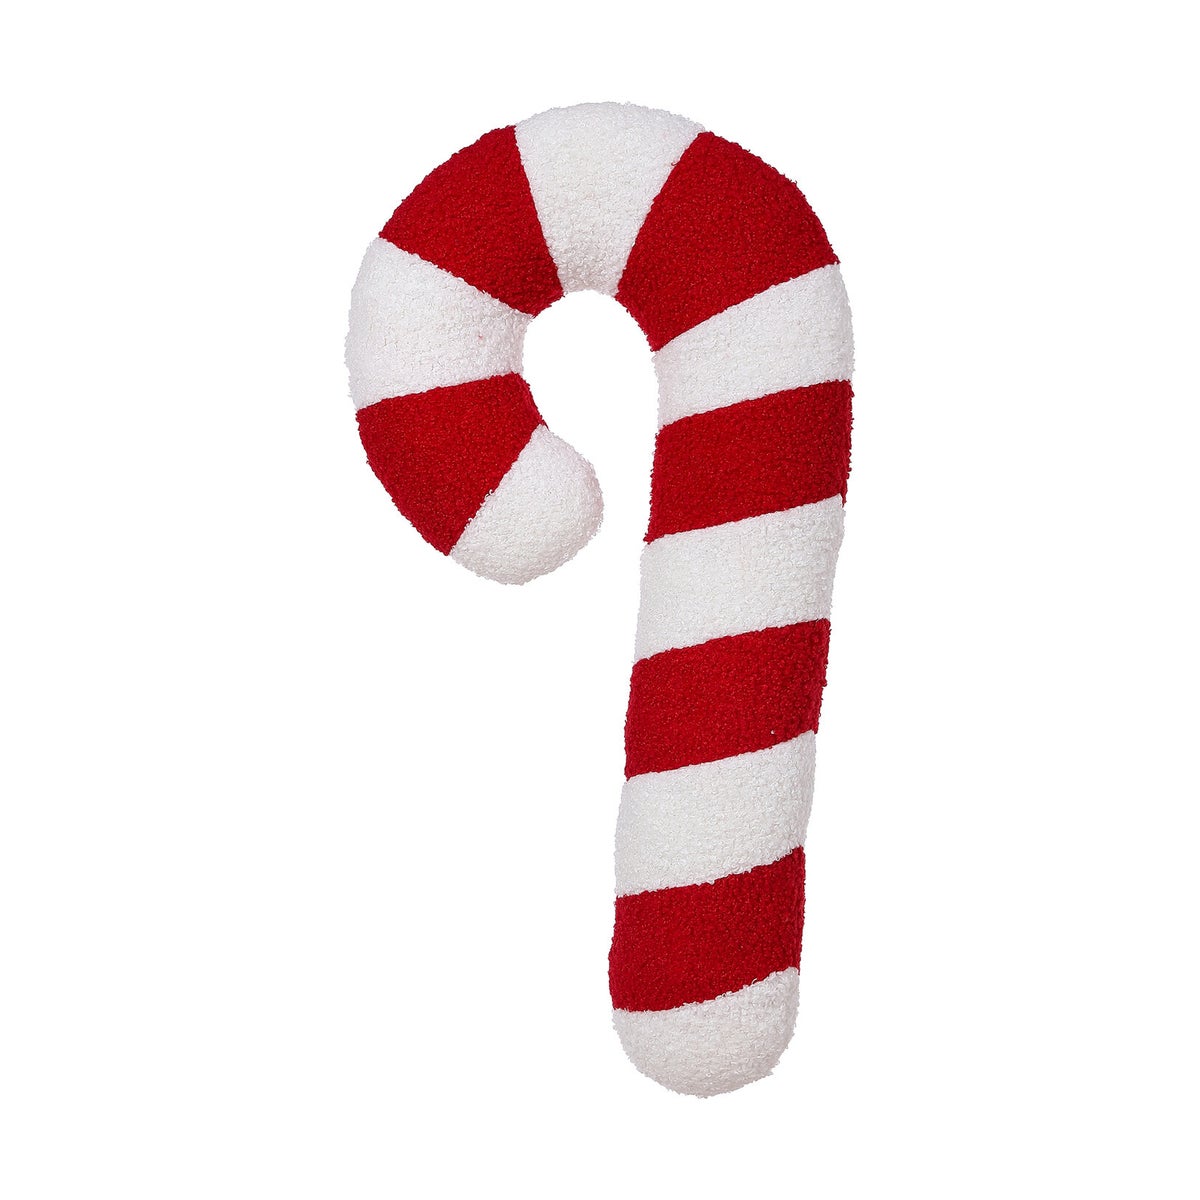 Pil Candy Cane